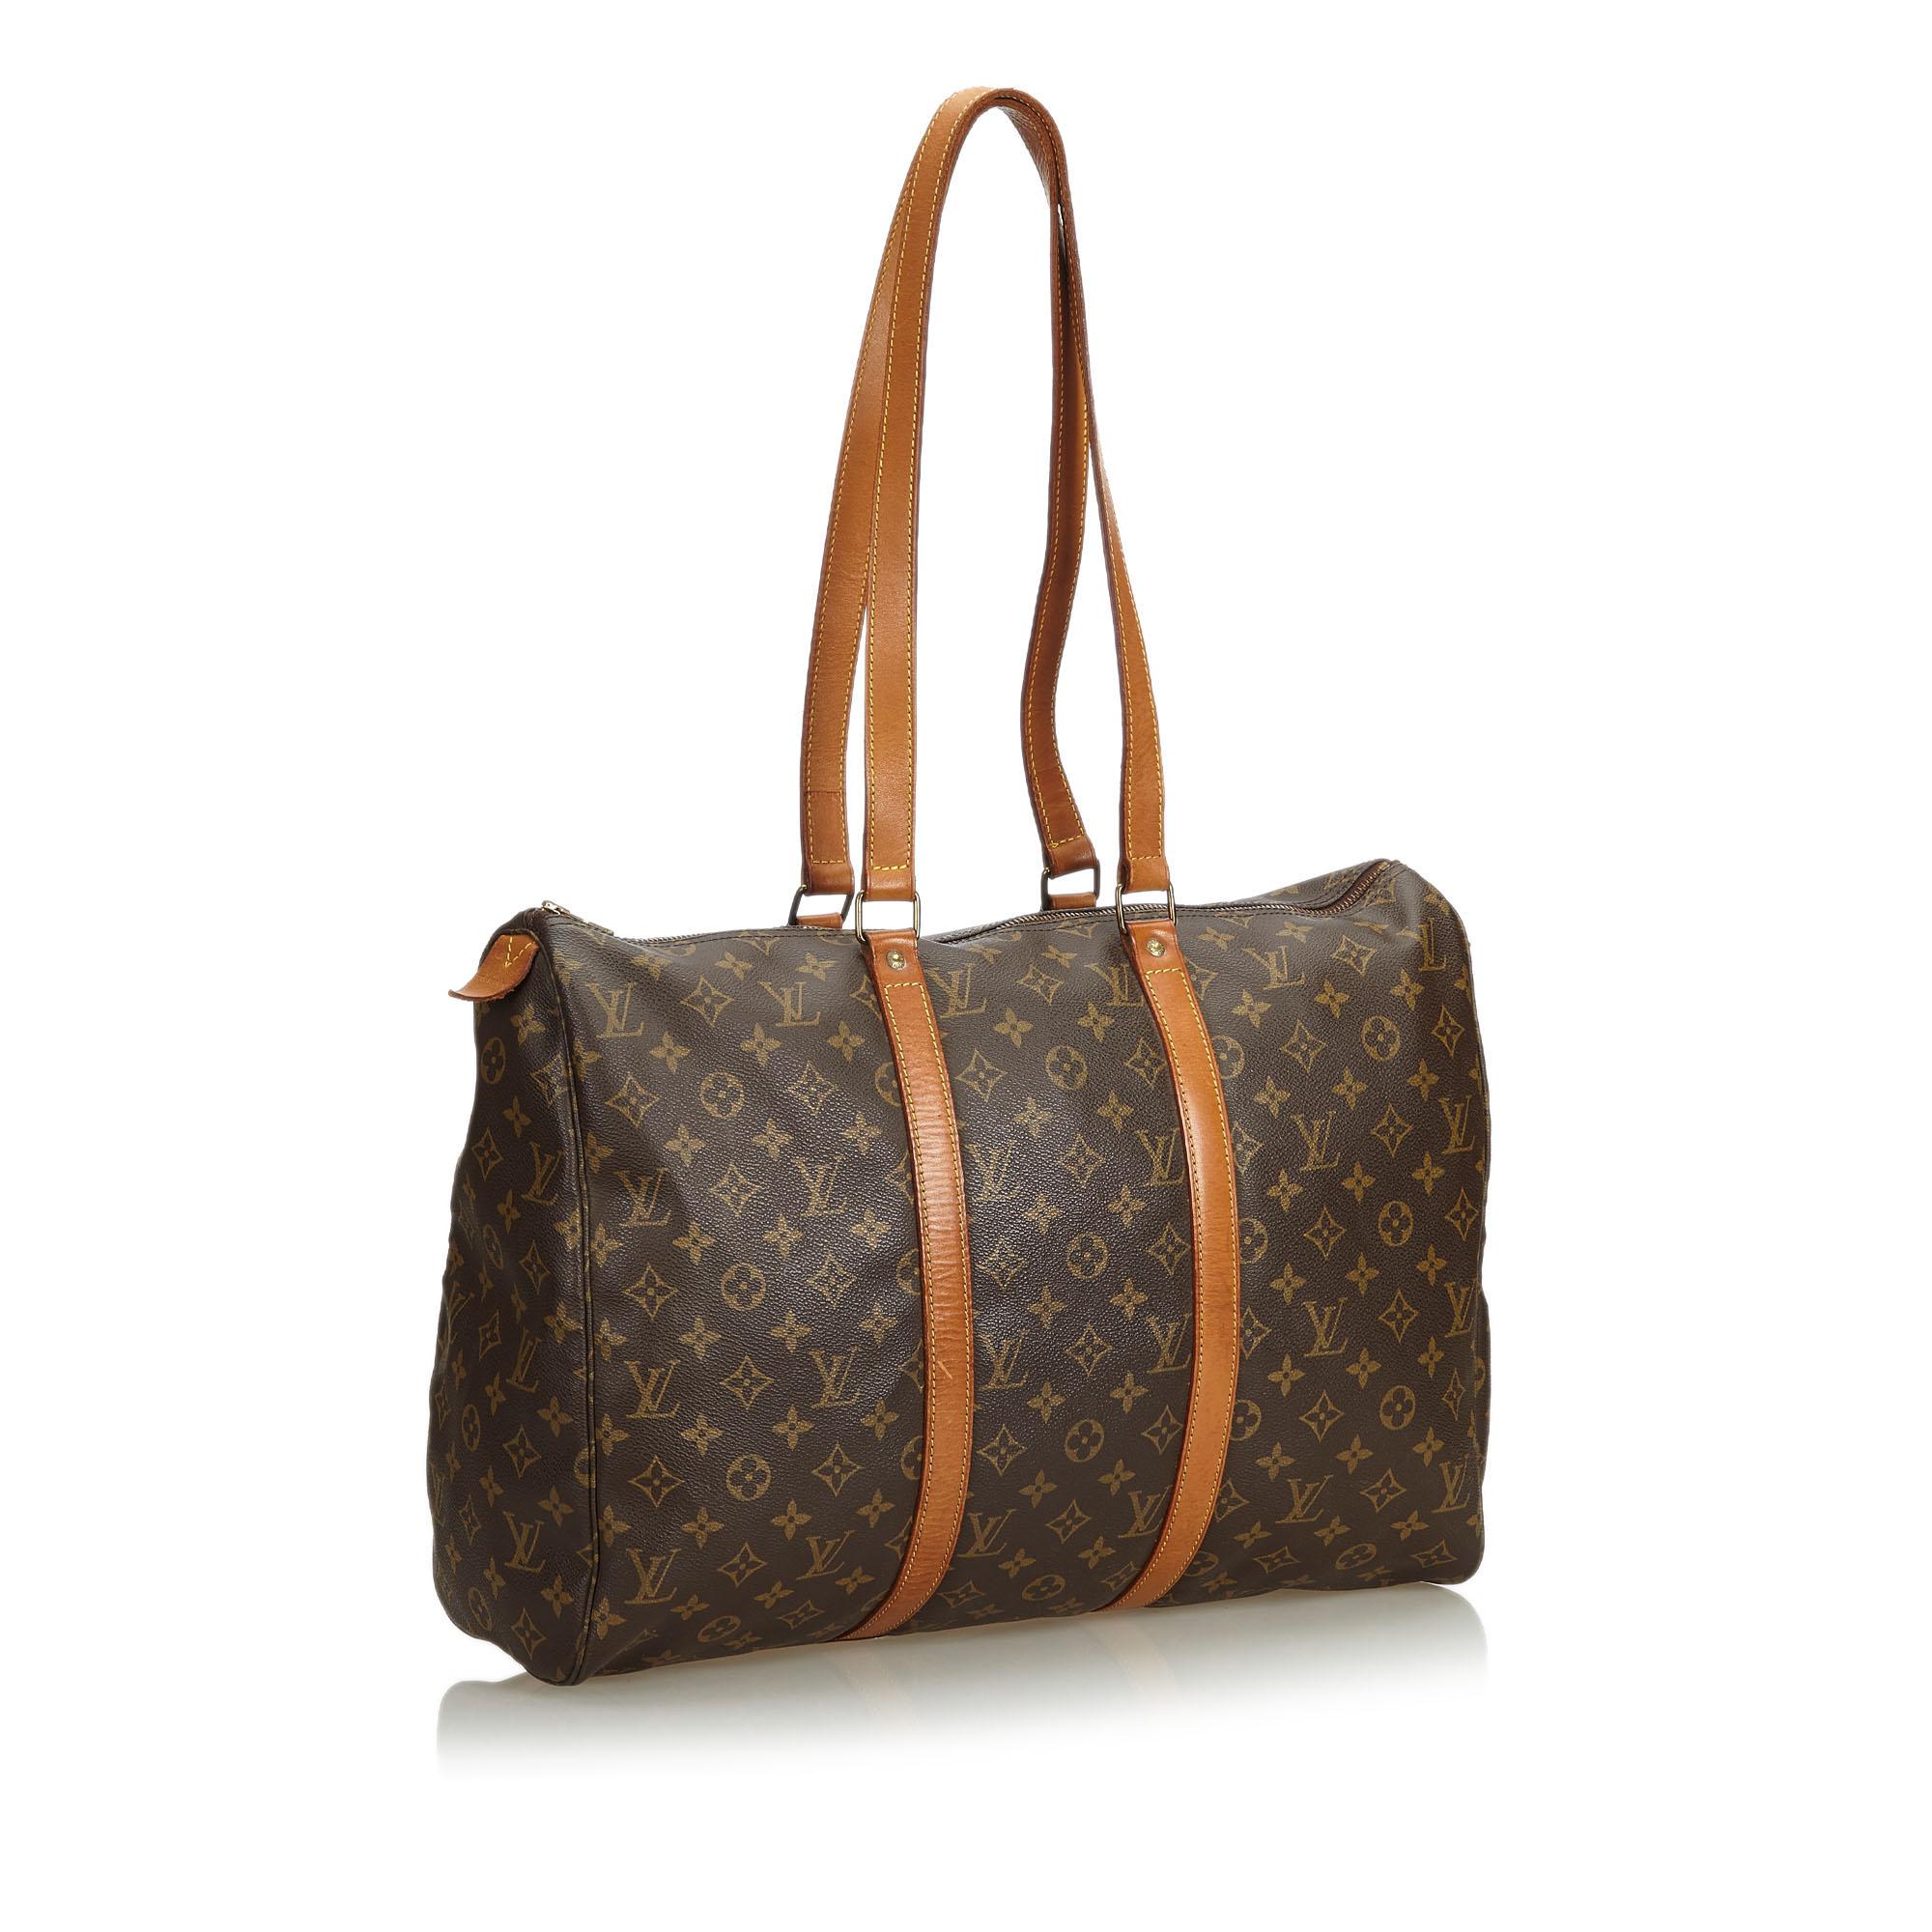 The Sac Flanerie 45 features the monogram canvas, flat vachetta shoulder straps and trim, a top zip closure, and an interior pocket. It carries as B condition rating.

Inclusions: 
This item does not come with inclusions.


Louis Vuitton pieces do